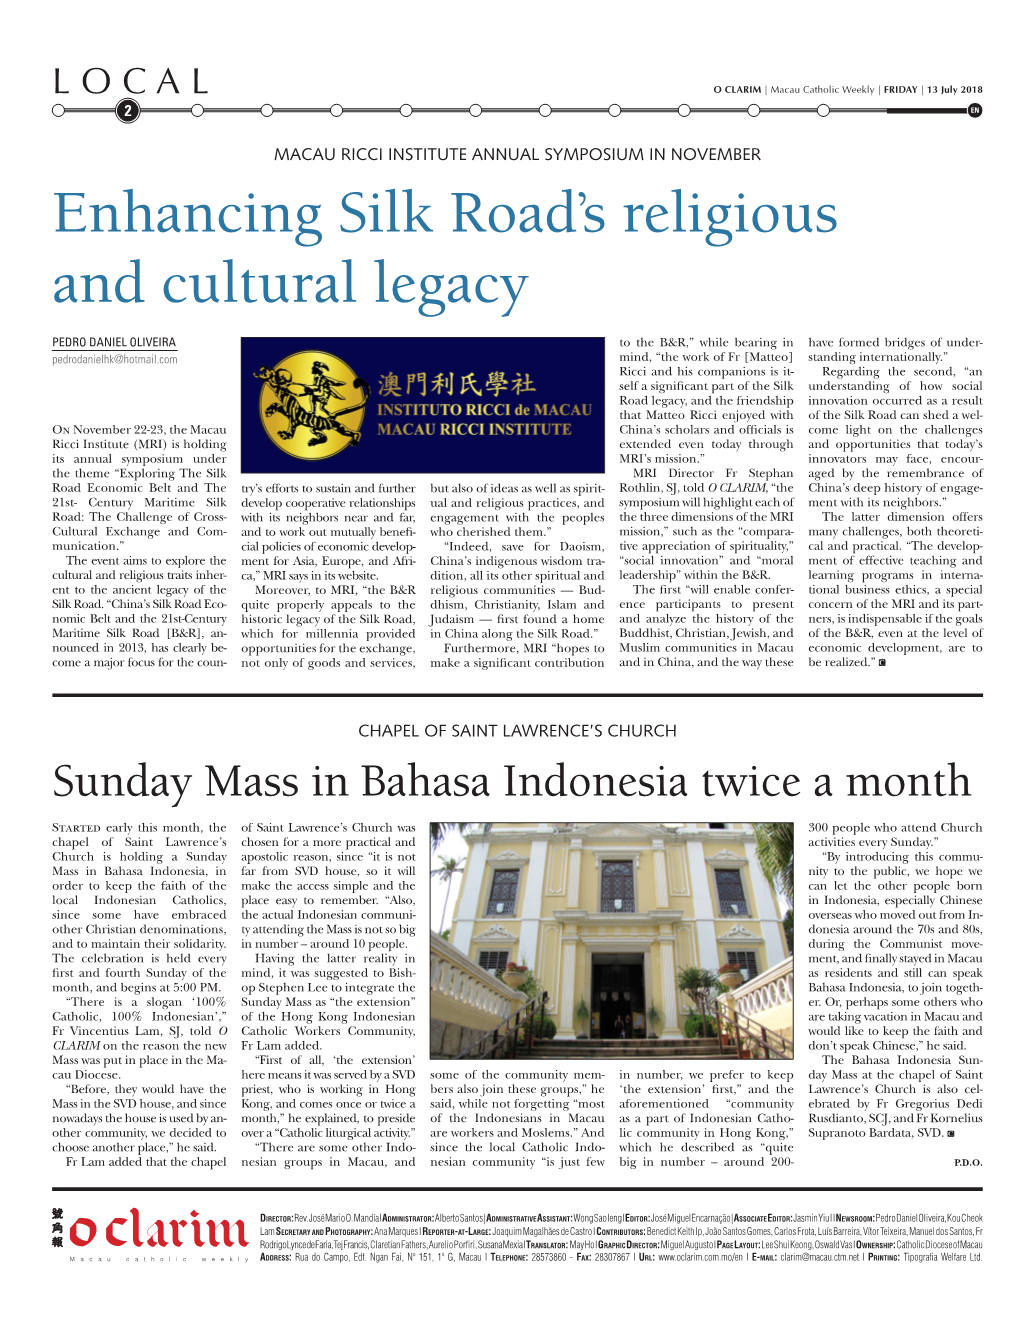 Enhancing Silk Road's Religious and Cultural Legacy